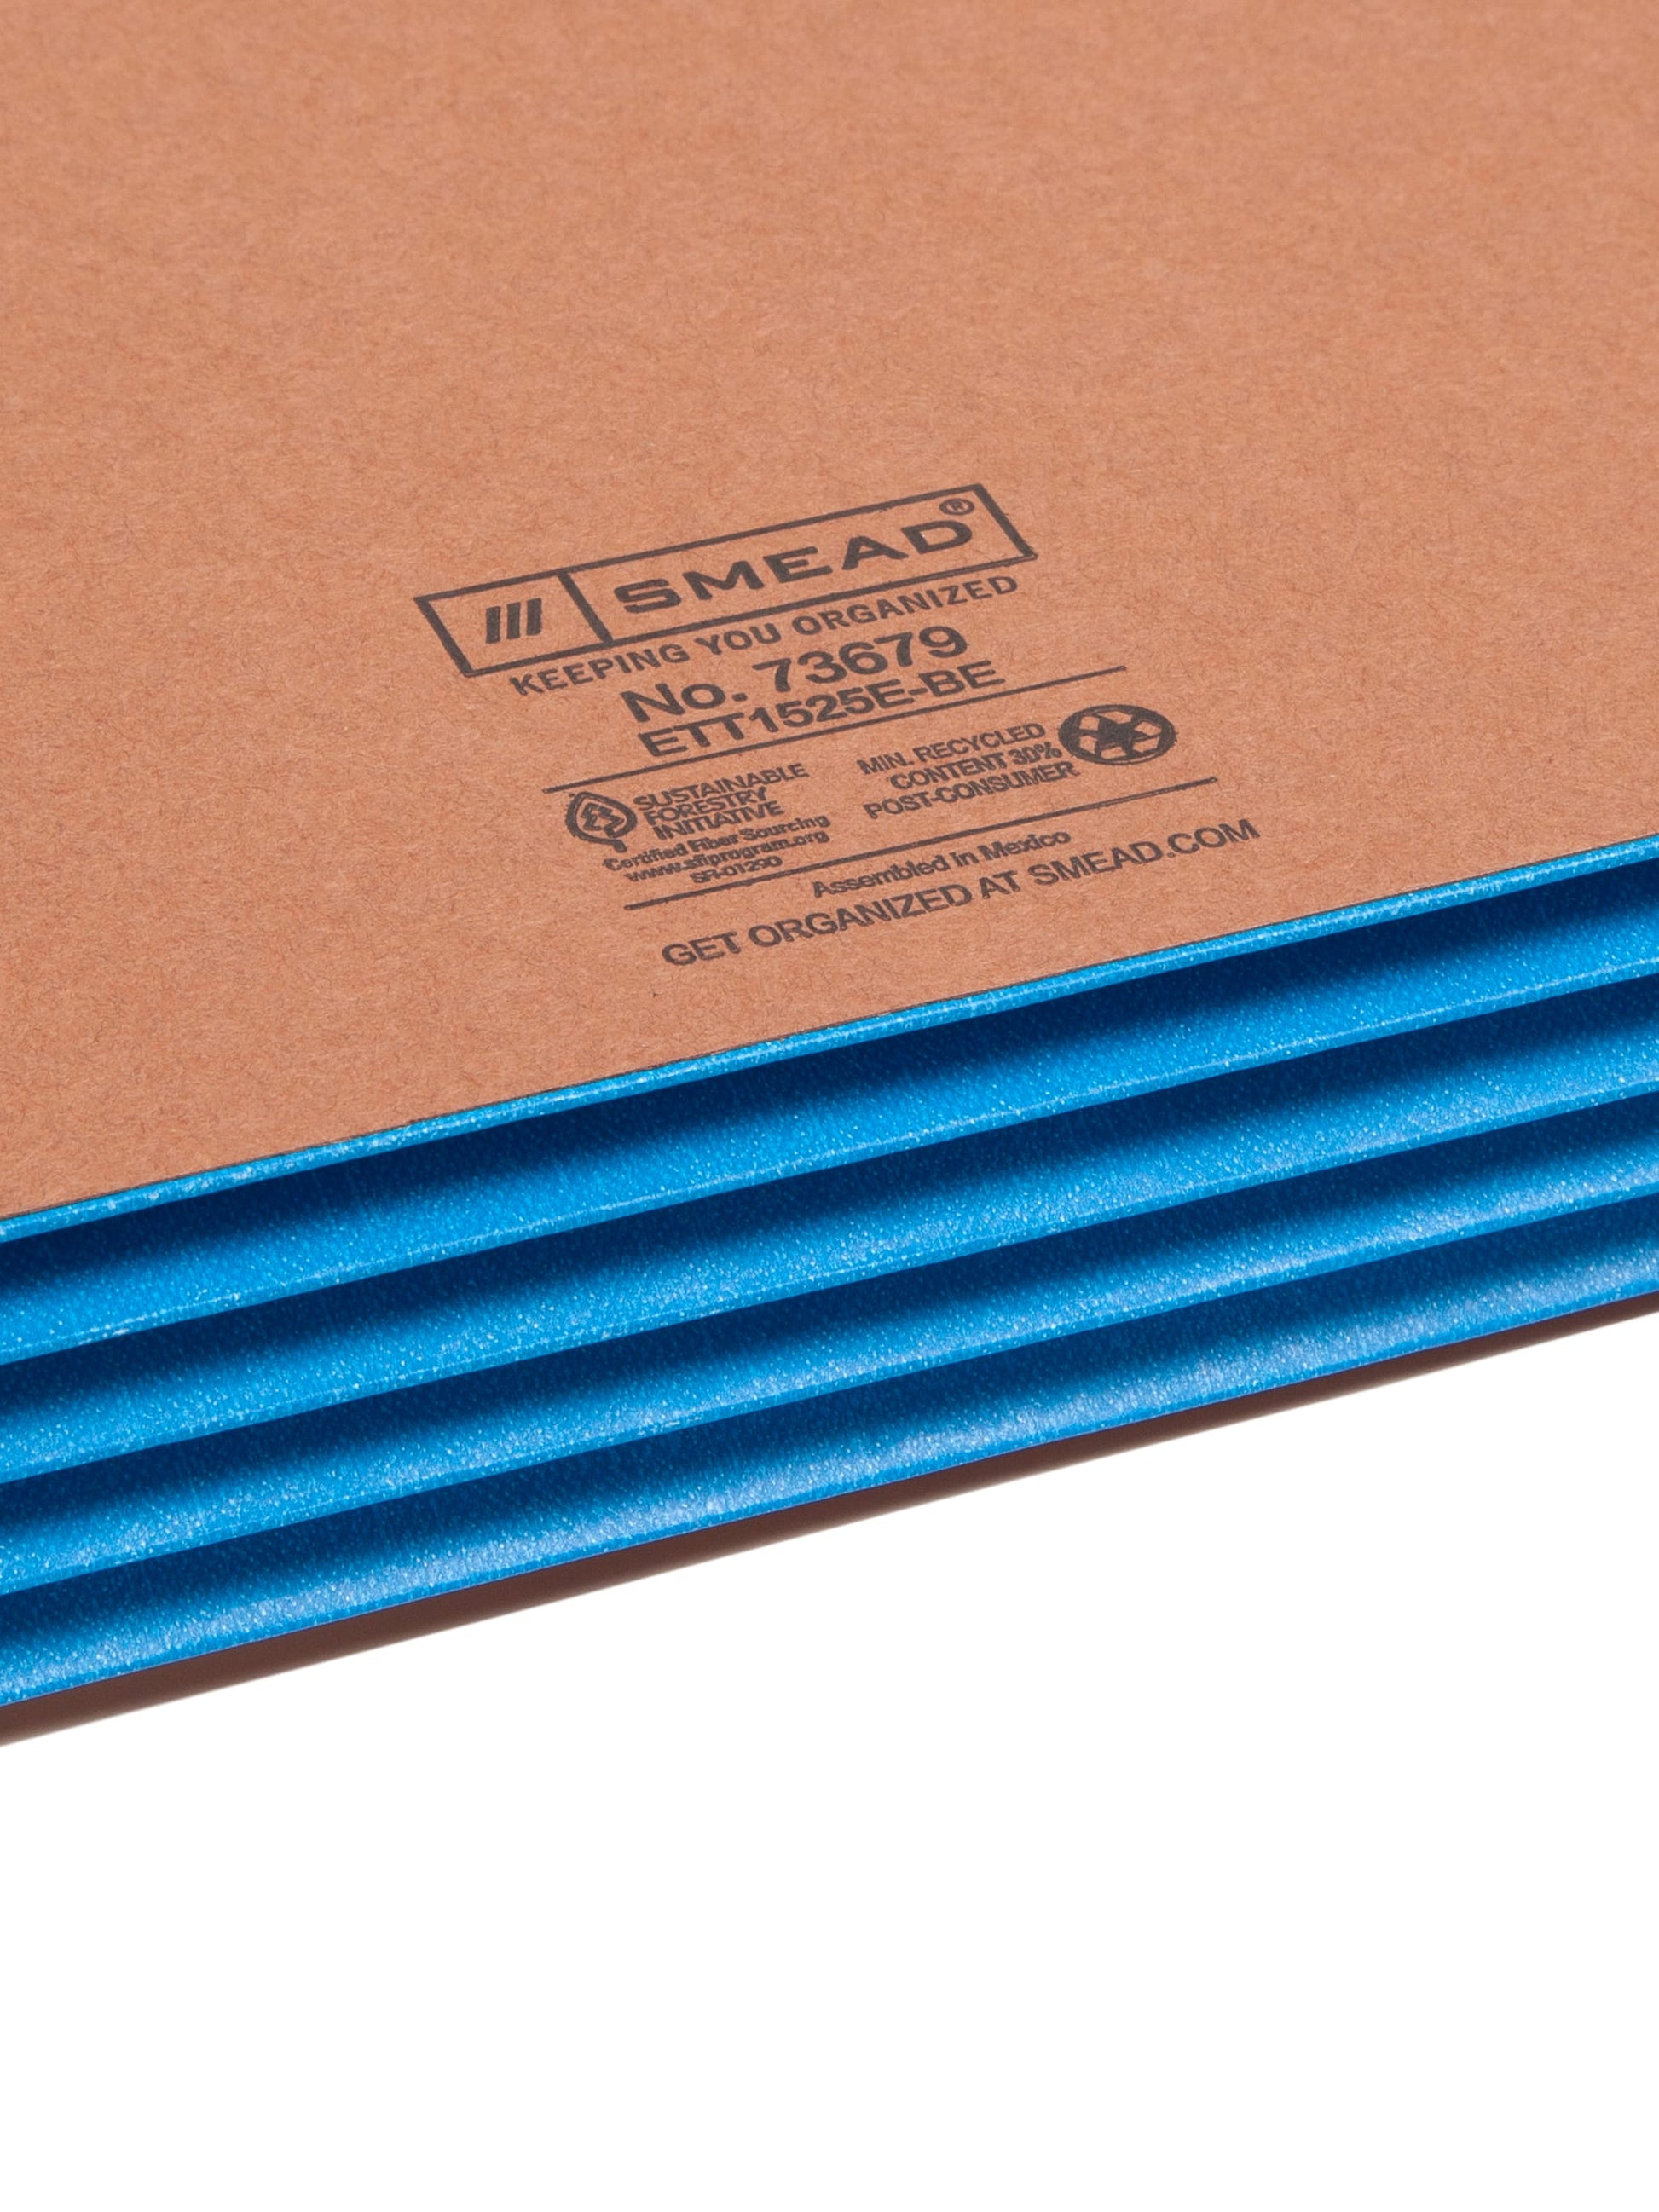 Reinforced End Tab File Pockets, Straight-Cut Tab, 3-1/2 inch Expansion, Blue Color, Extra Wide Letter Size, Set of 0, 30086486736795